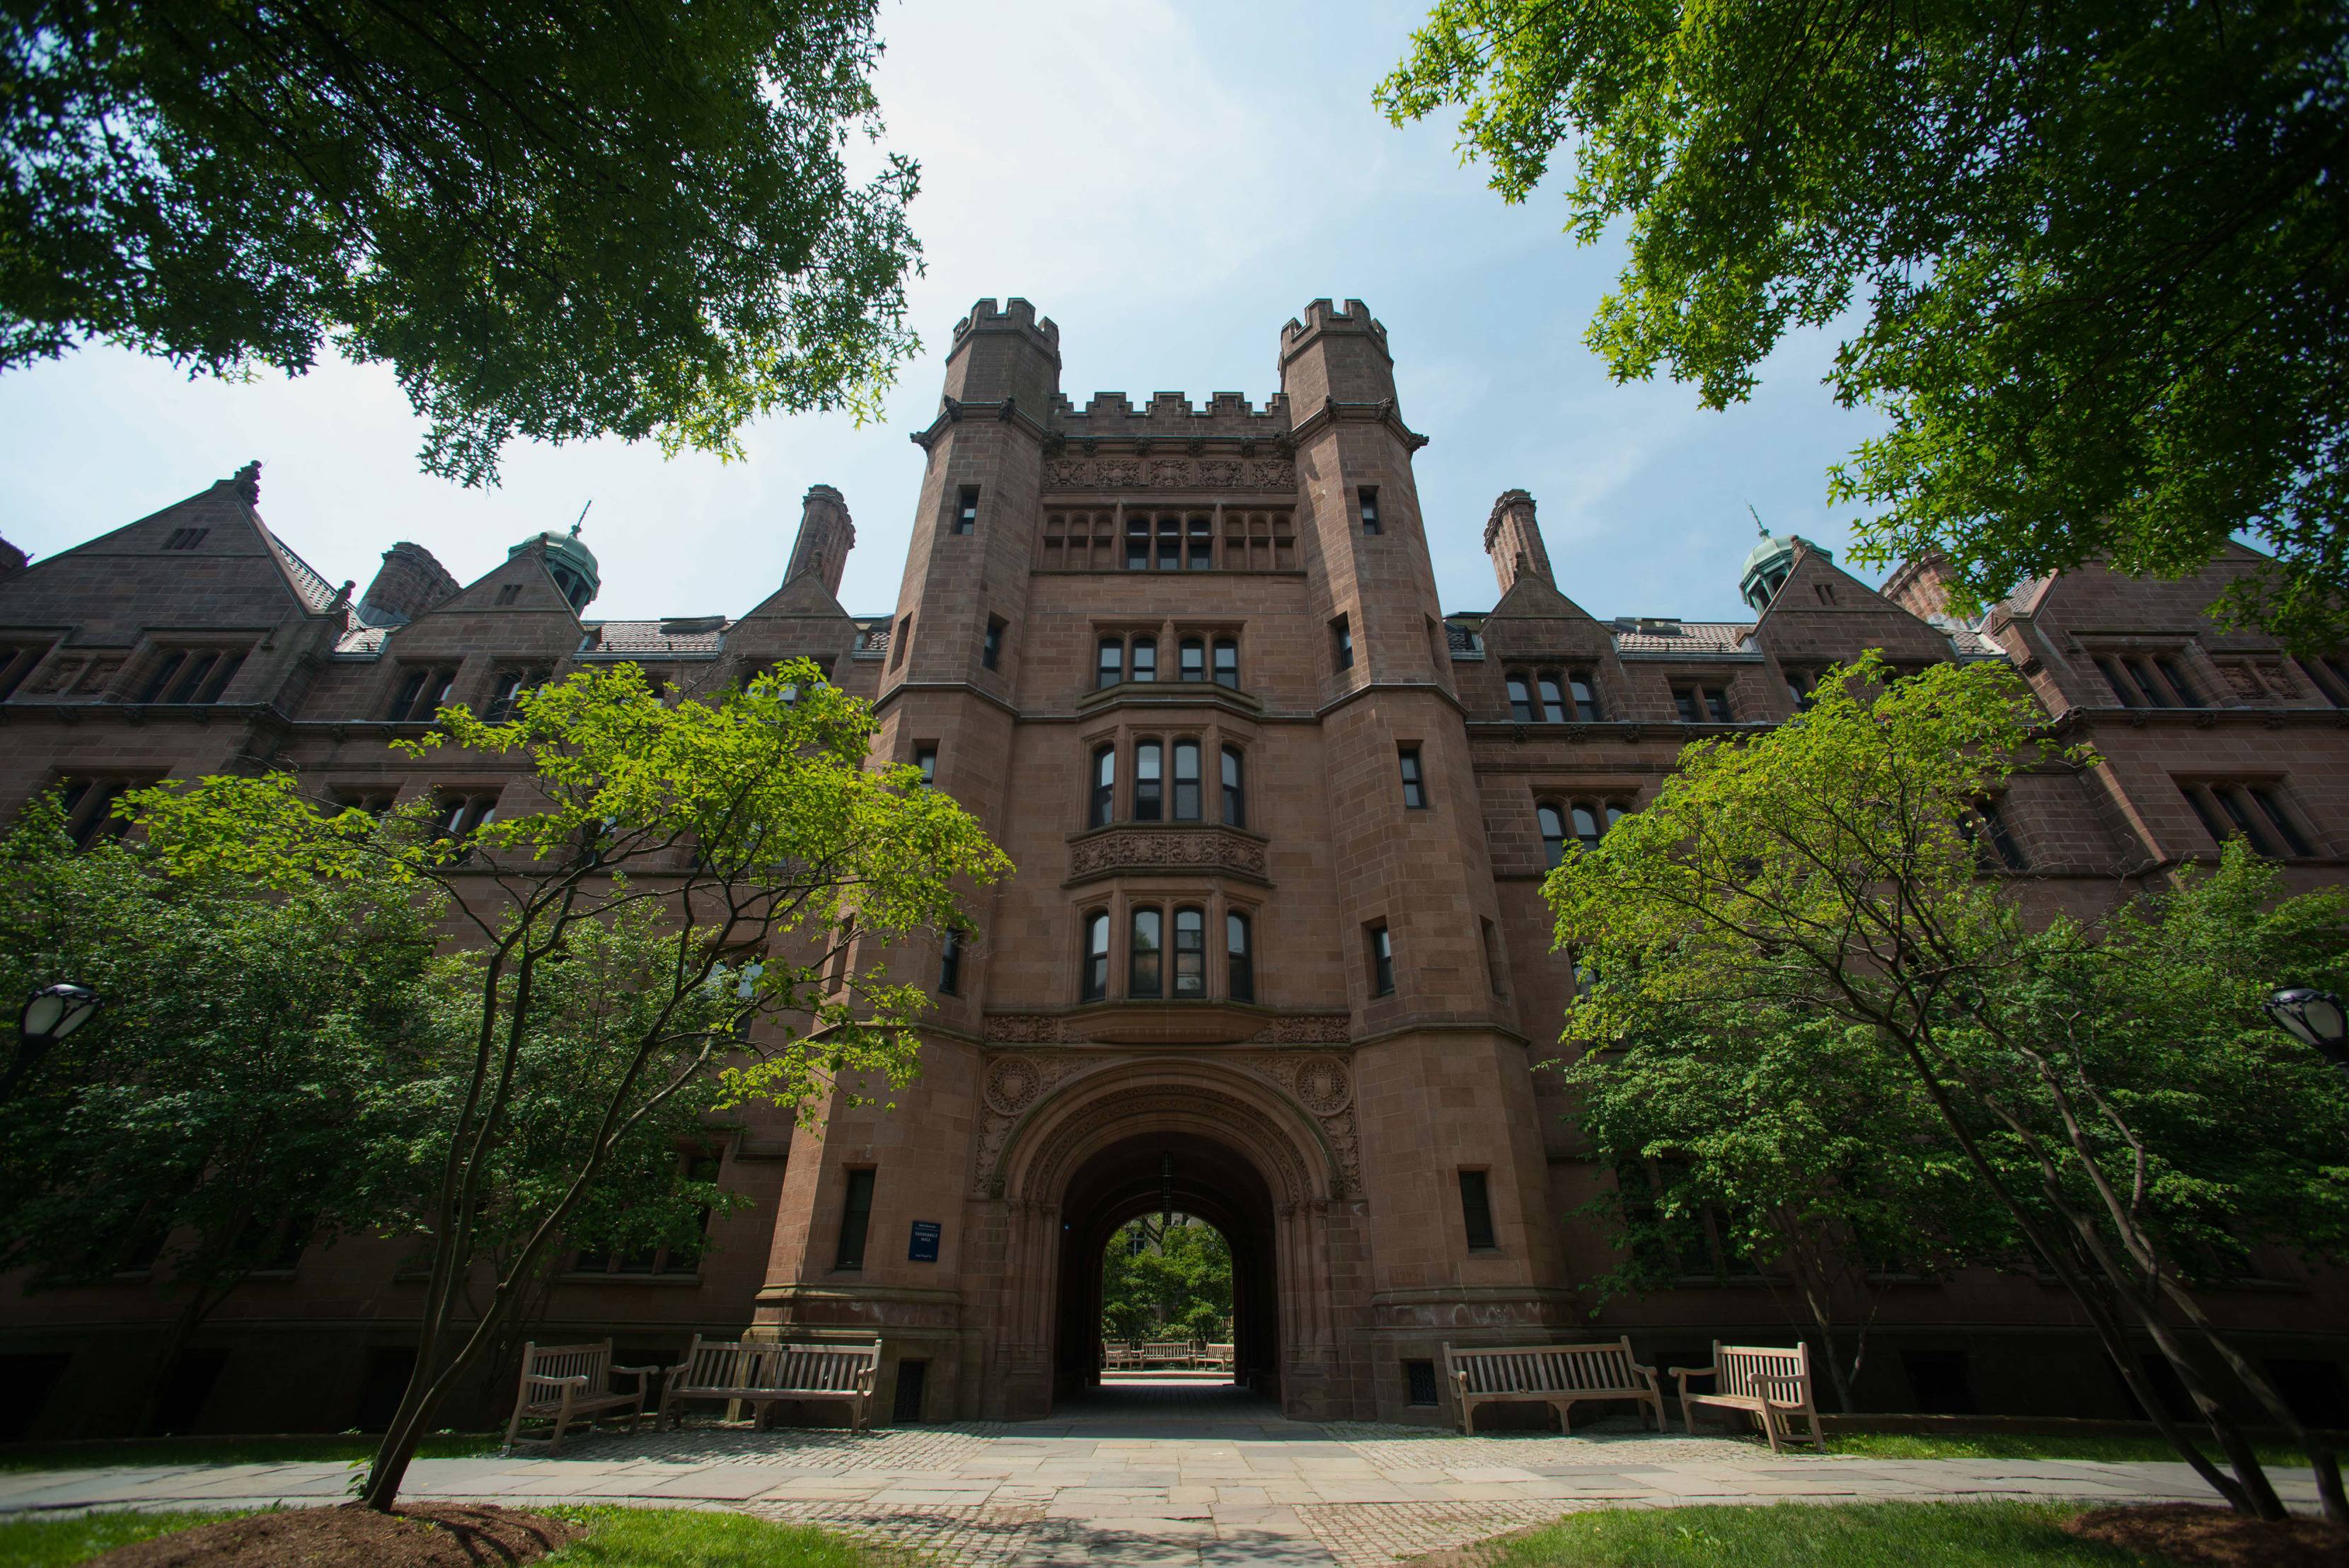 Yale Is Revamping Its Secret Society System so Students Don't Feel